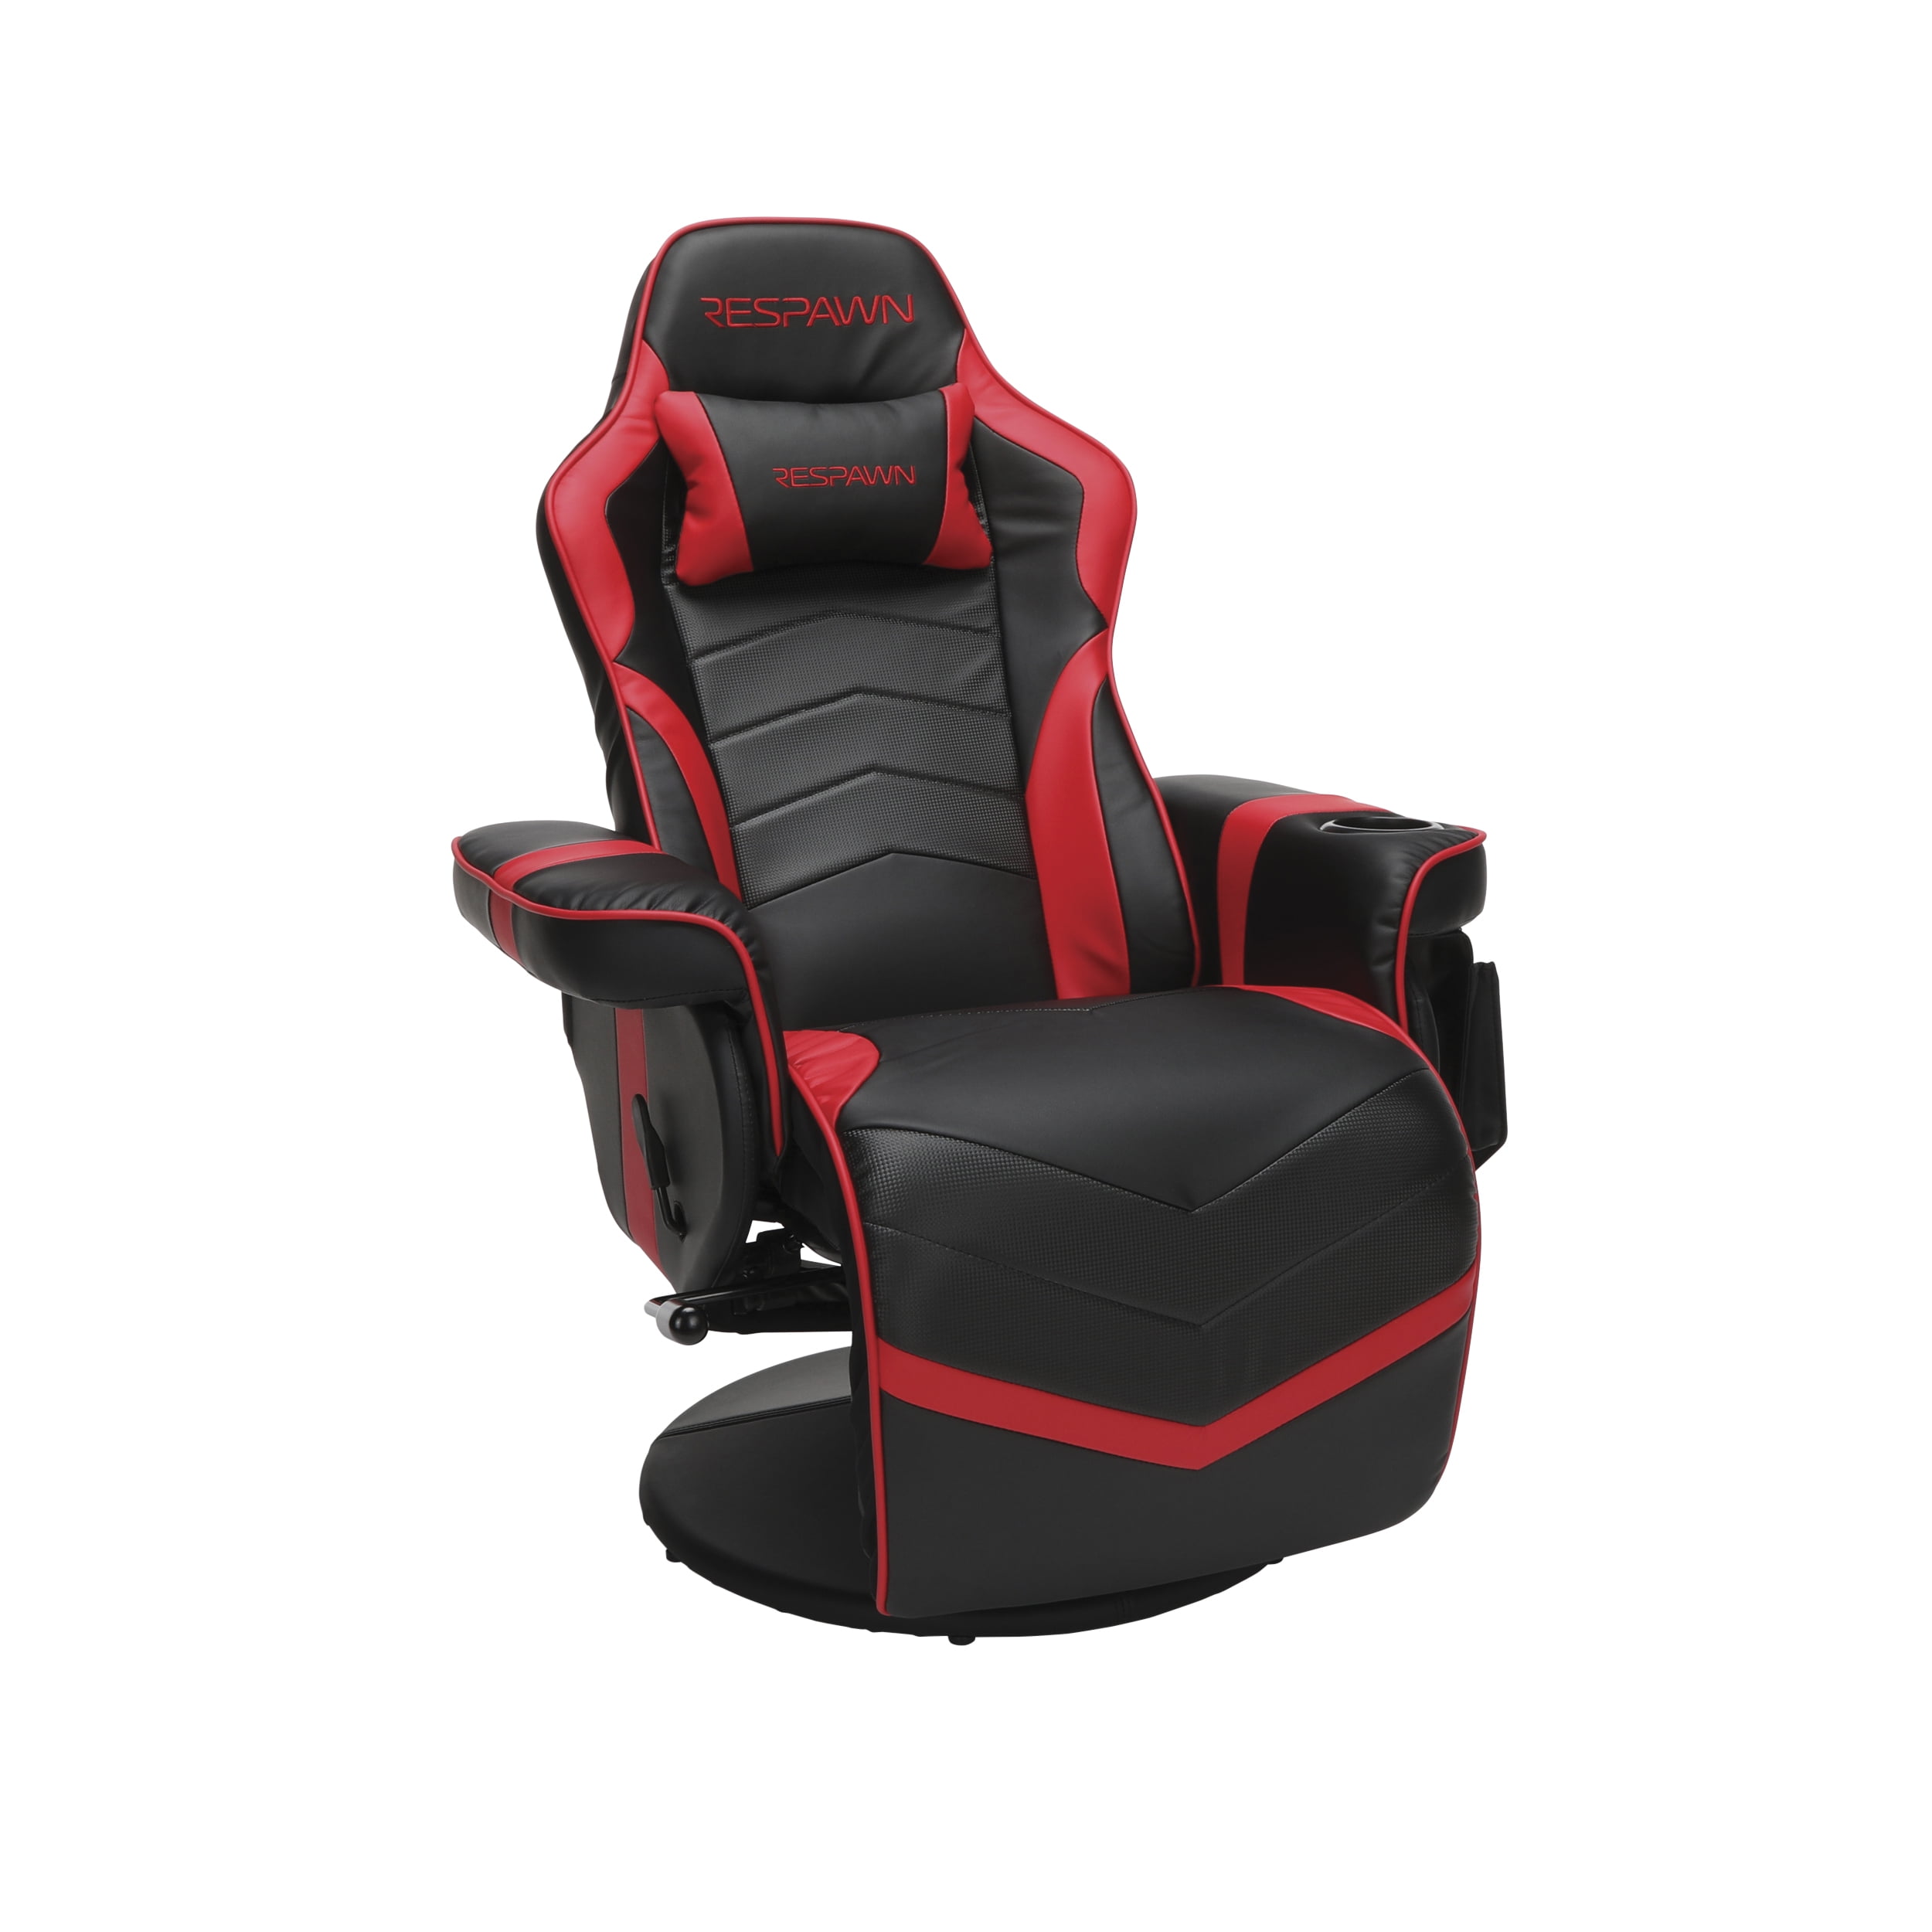 Repawn Racing Gaming Chair Leather Ergonomic Adjustable Comfort Seat RSP200 Red